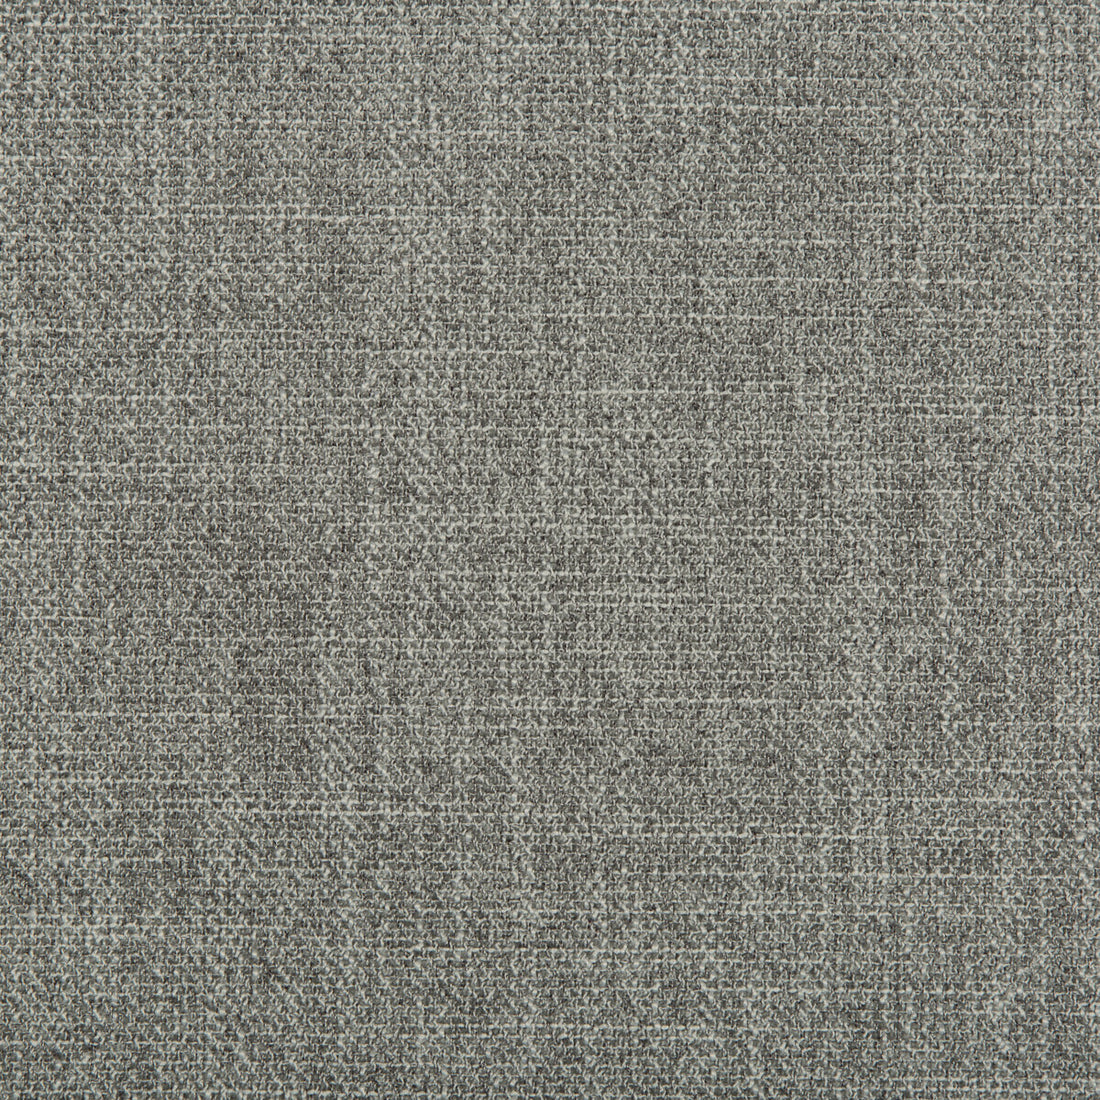 Kravet Contract fabric in 35404-1511 color - pattern 35404.1511.0 - by Kravet Contract in the Crypton Incase collection